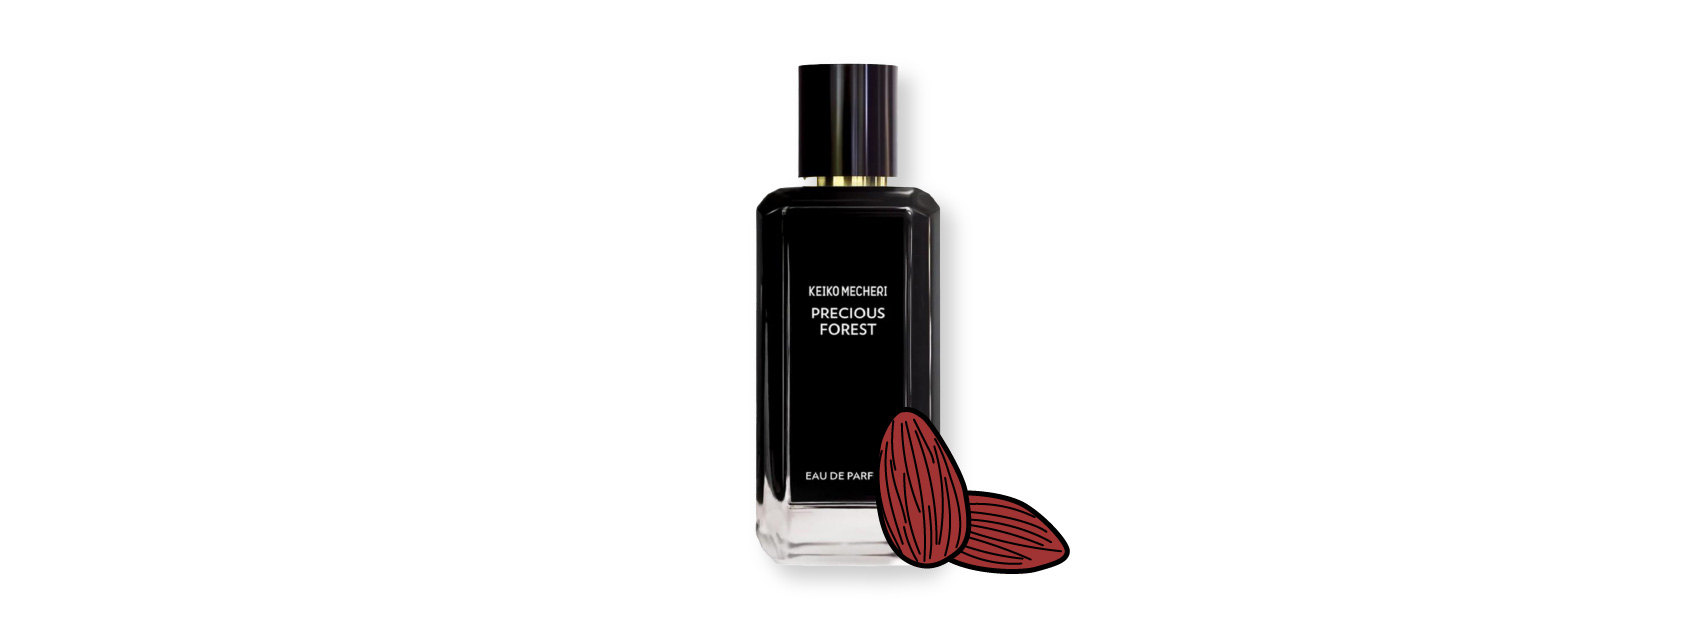 bottle of precious forest by keiko mecheri with an illustration of almonds